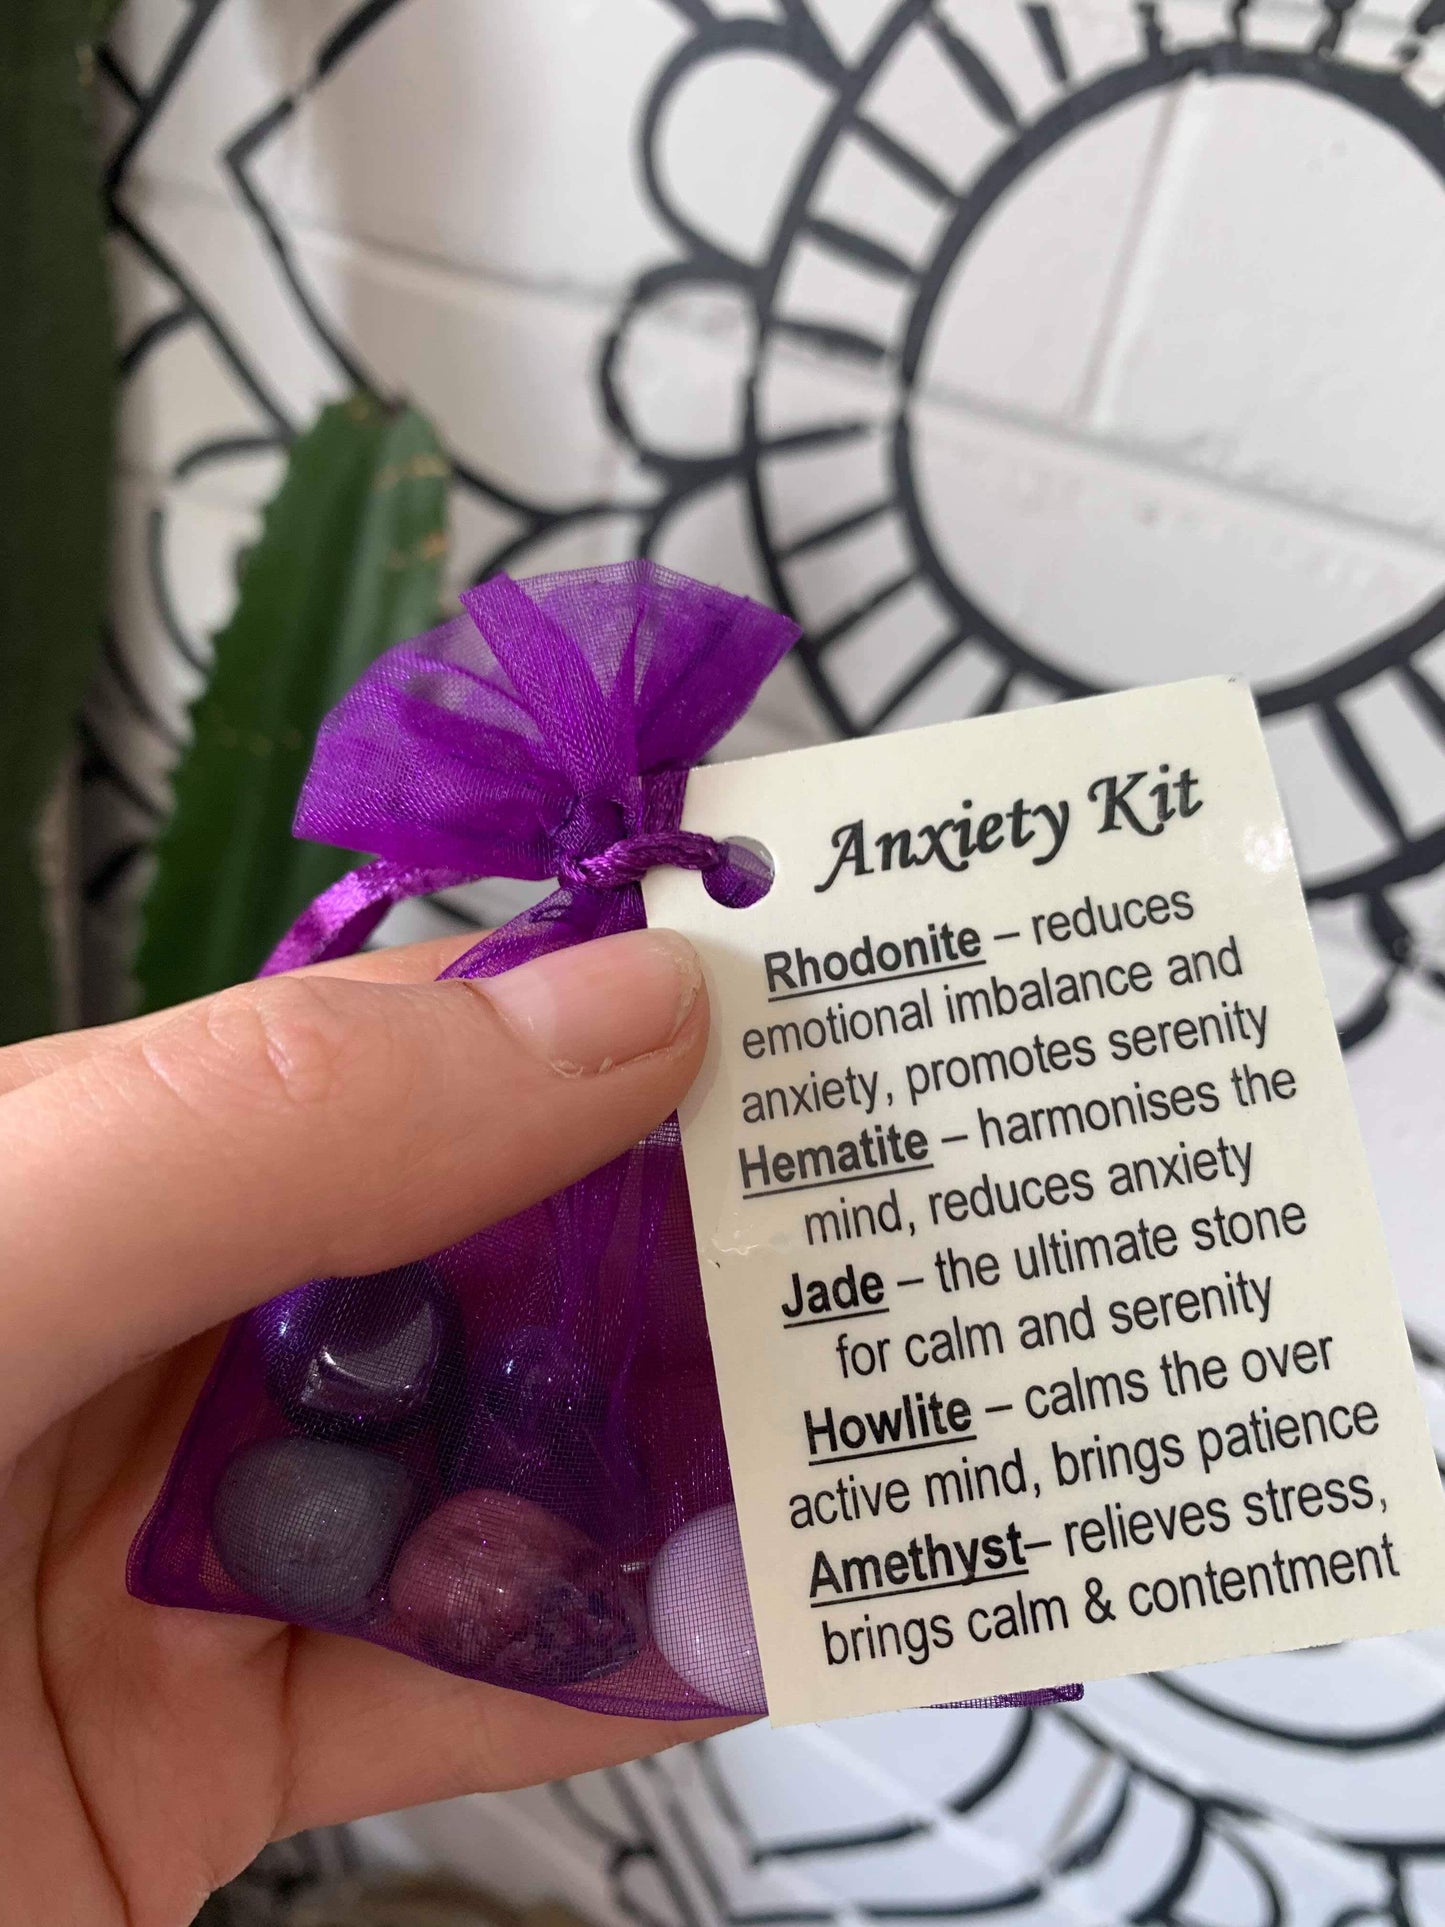 Crystal set perfect for Anxiety